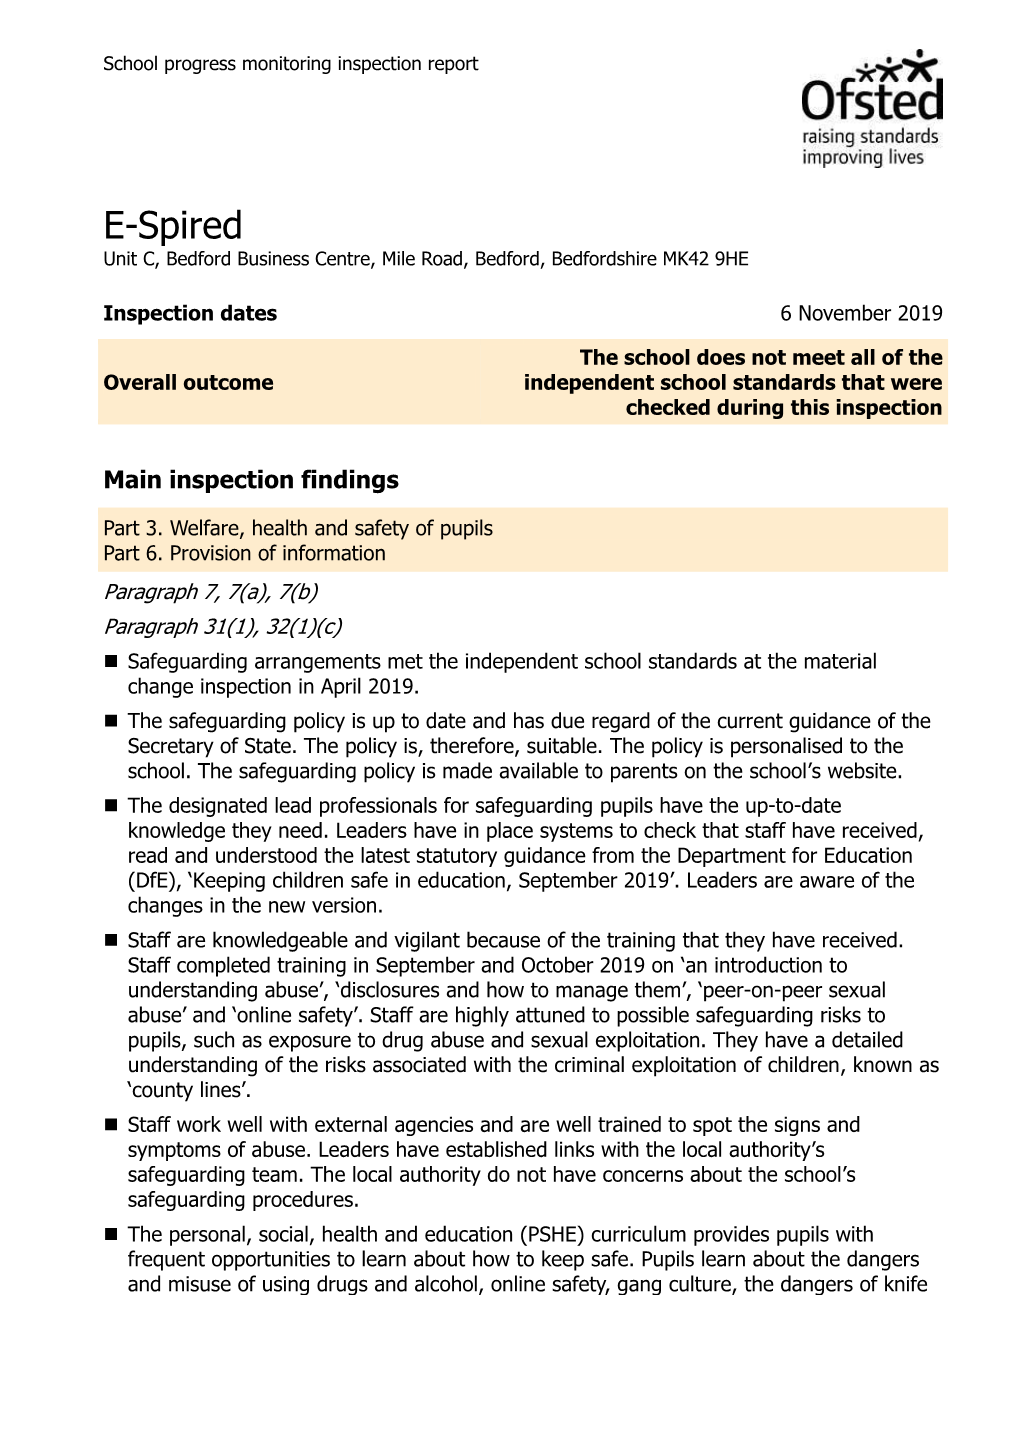 Ofsted Material Change Inspection Report November 2019